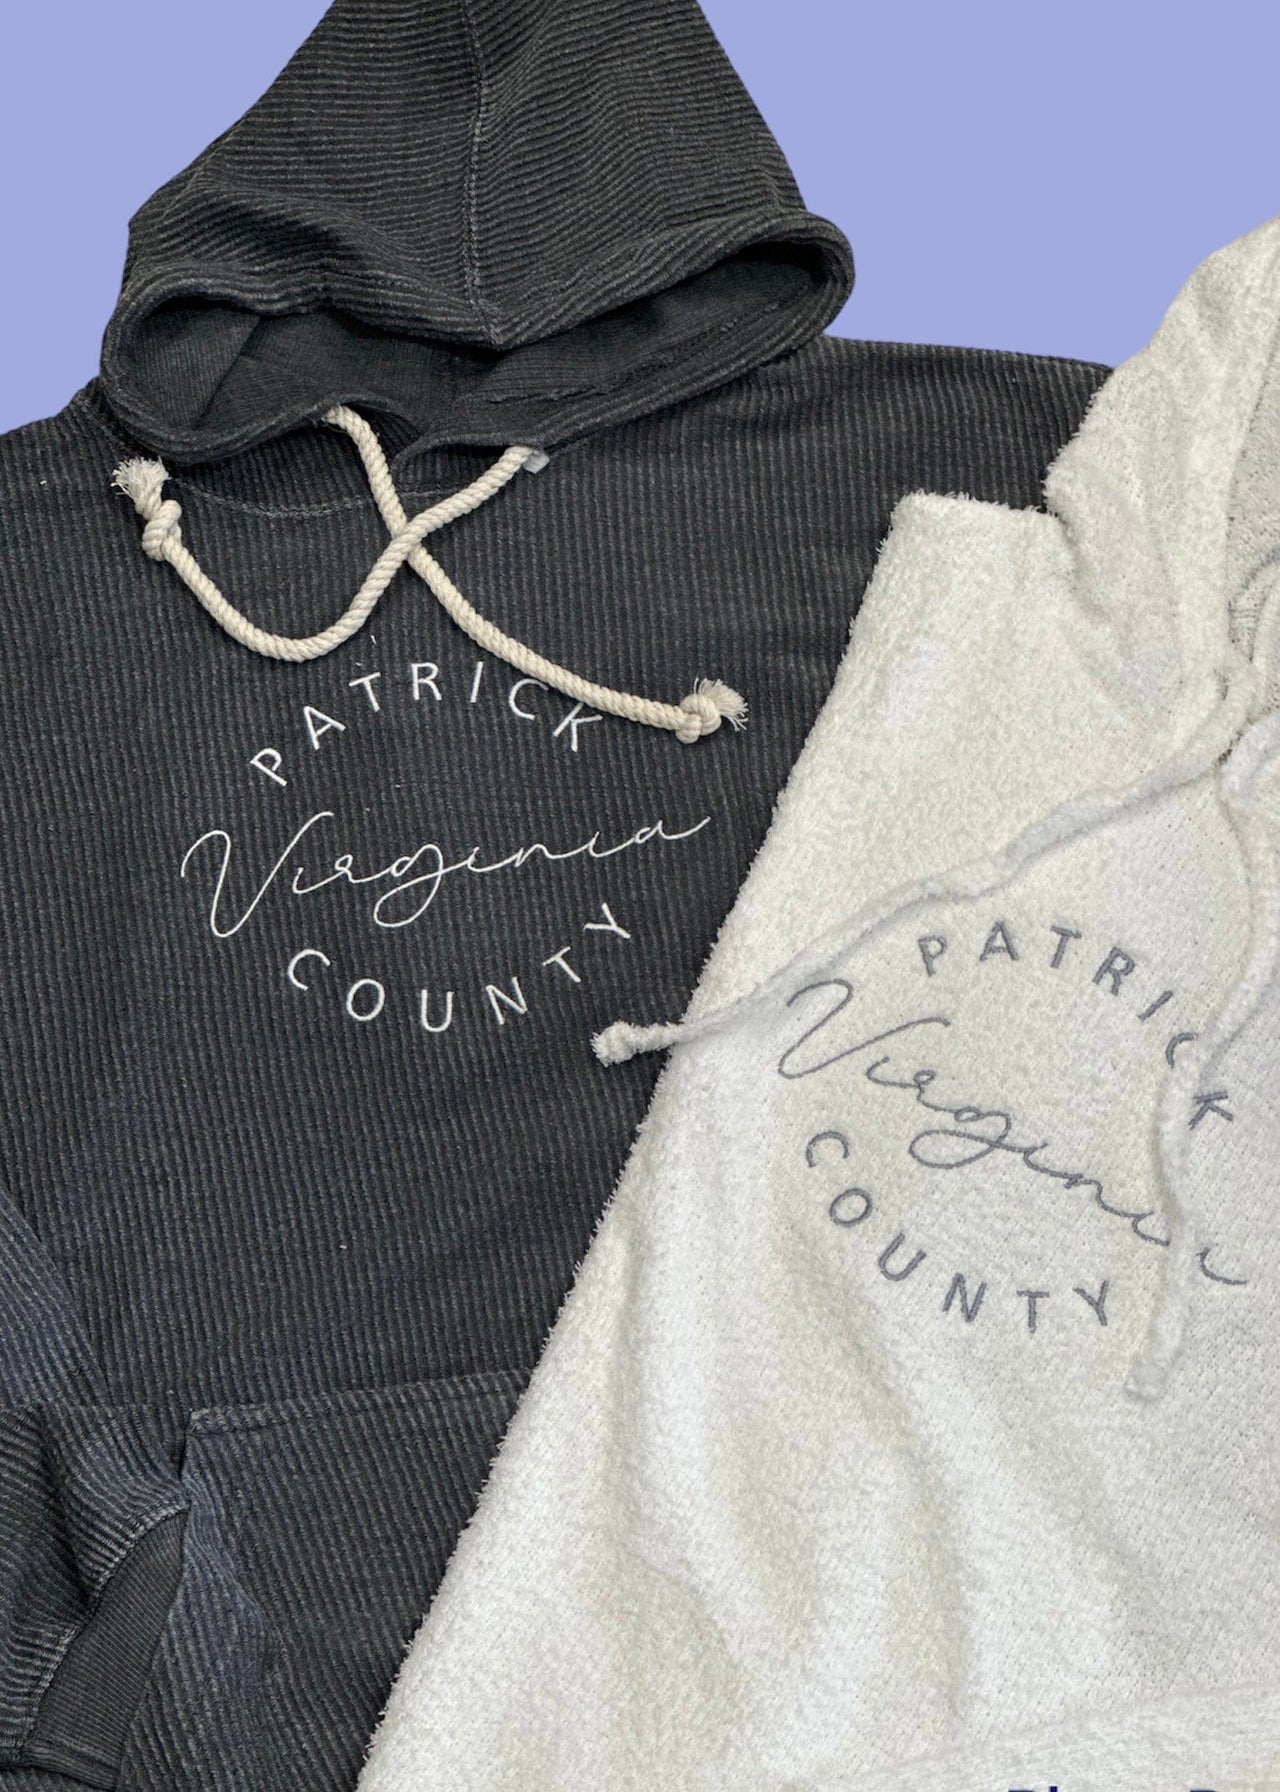 Corded Hoodie Patrick County Mattie B's Gifts & Apparel